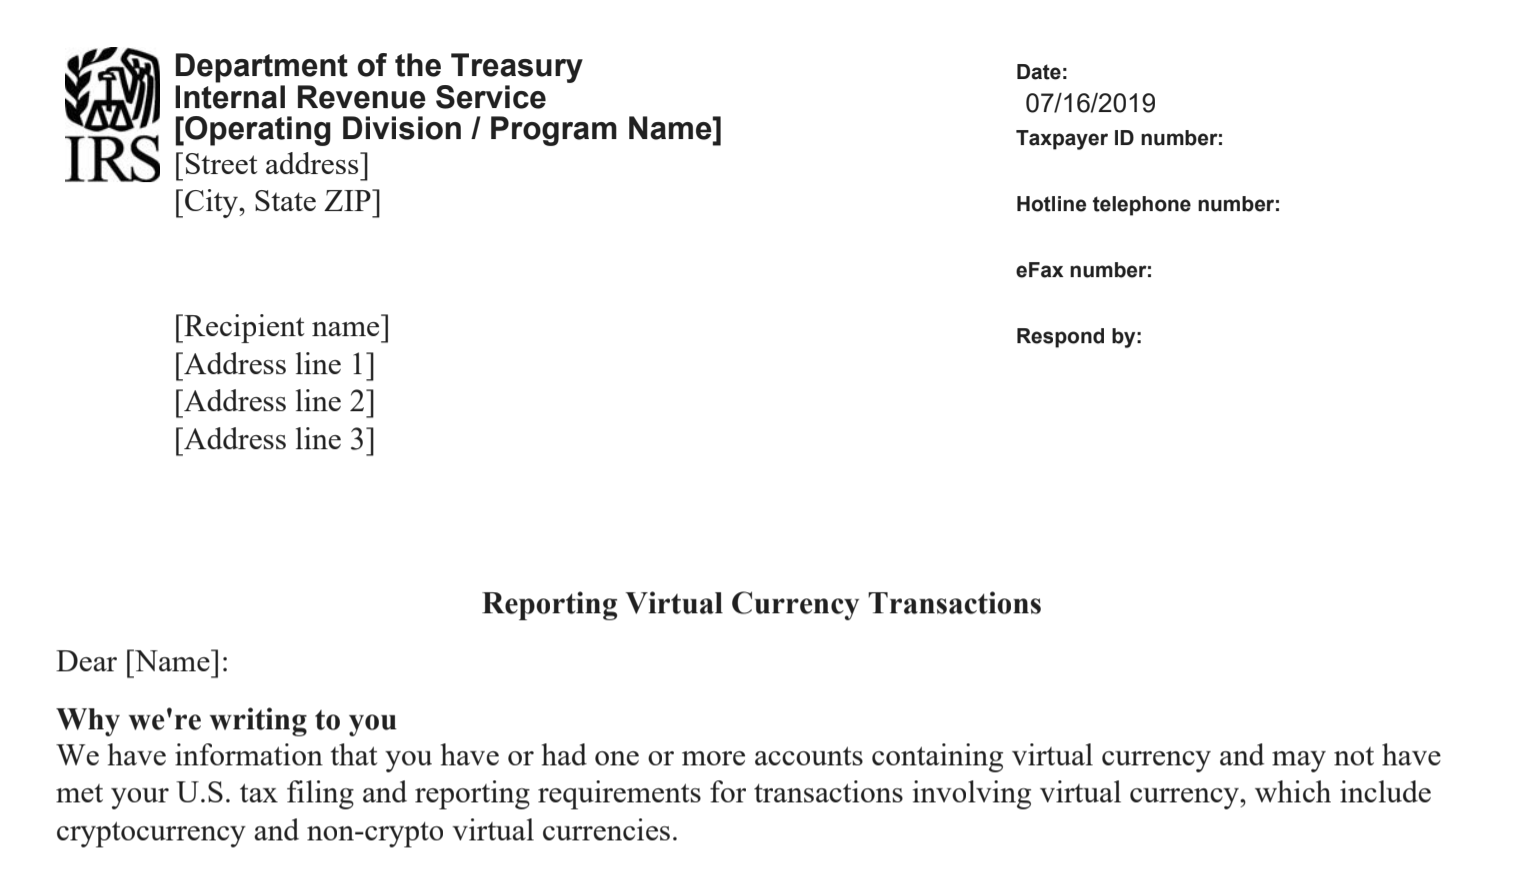 Crypto payments above $10,000 would be reported to IRS under